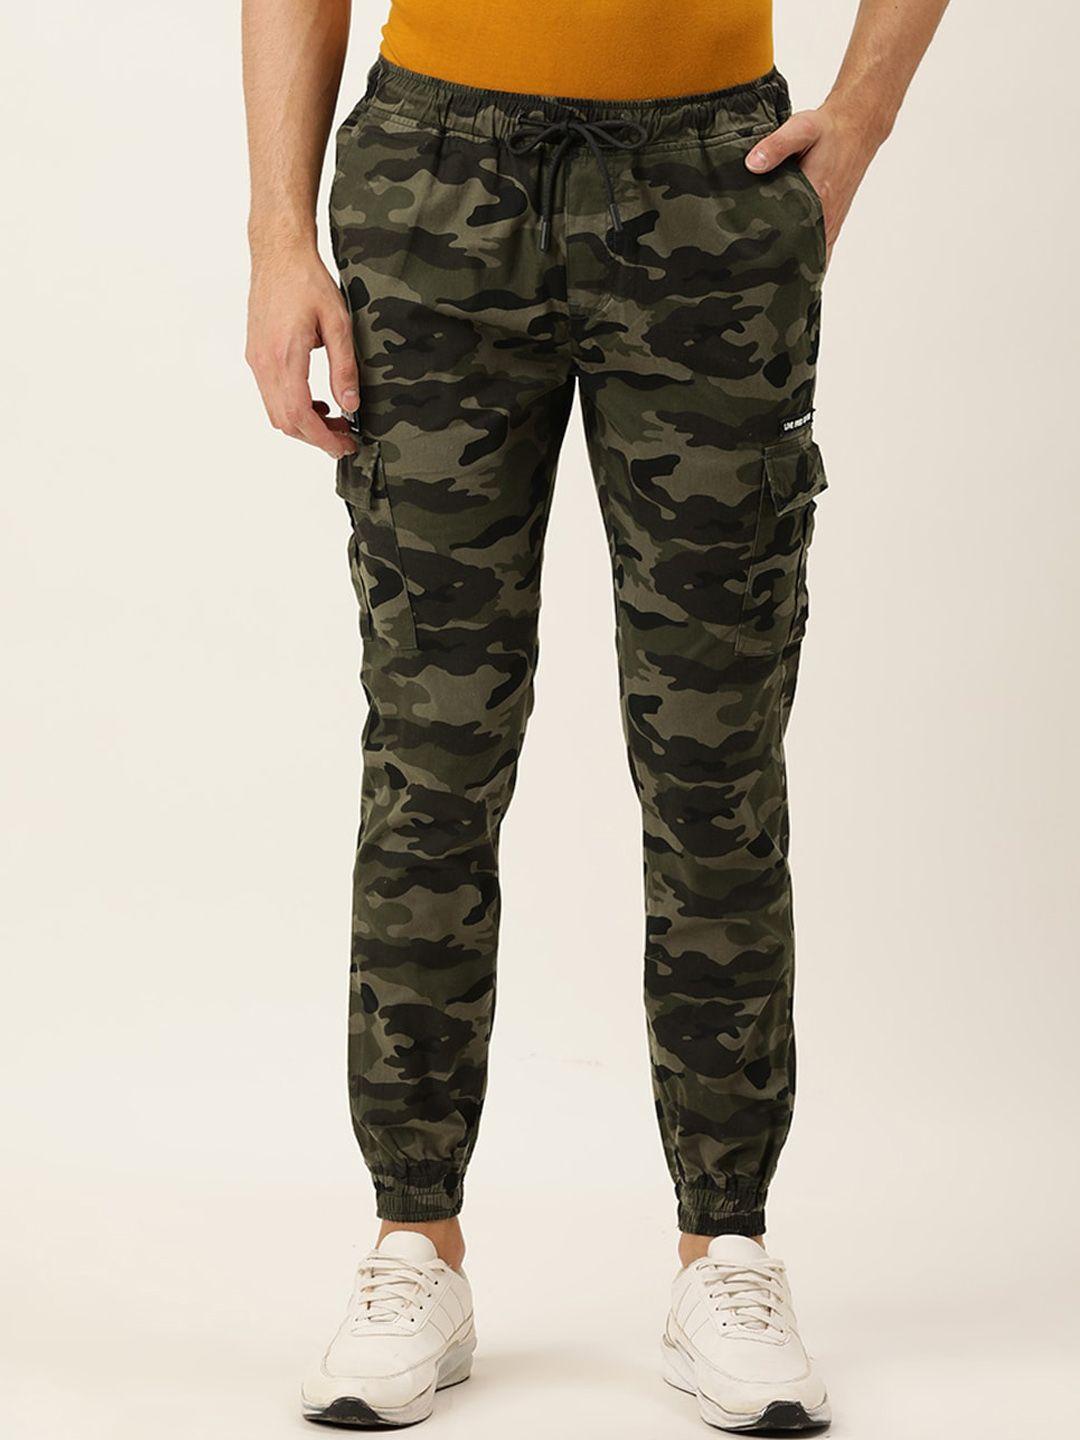 ivoc men camouflage printed slim fit joggers trousers